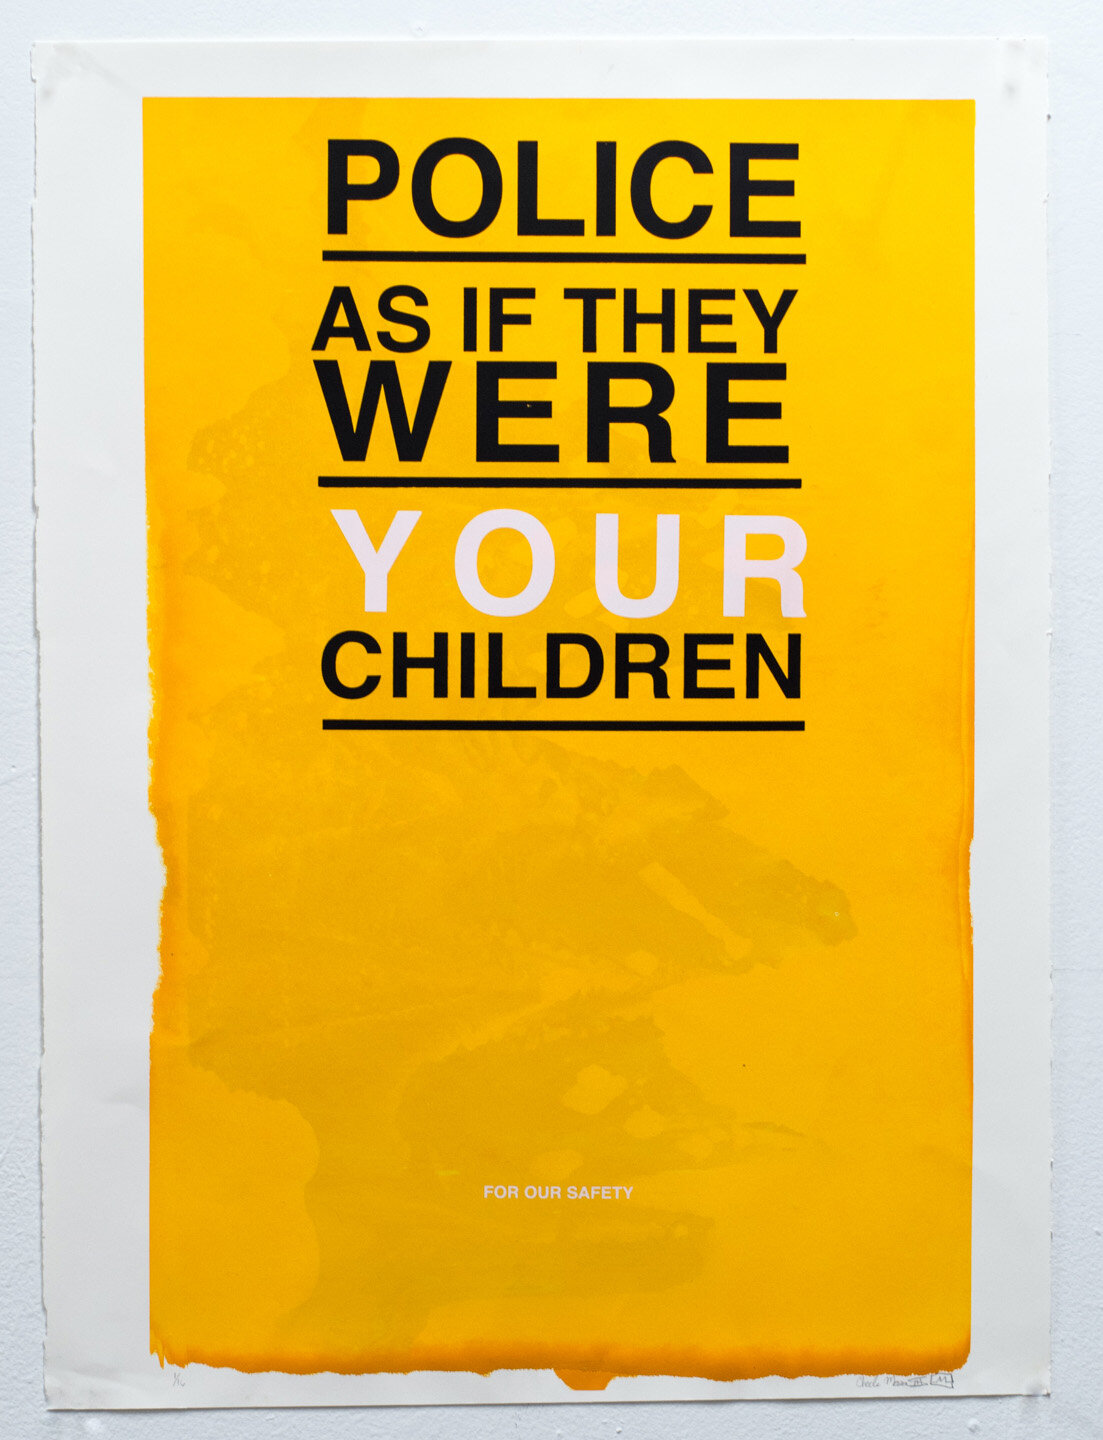 Police as if they were (for our safety)